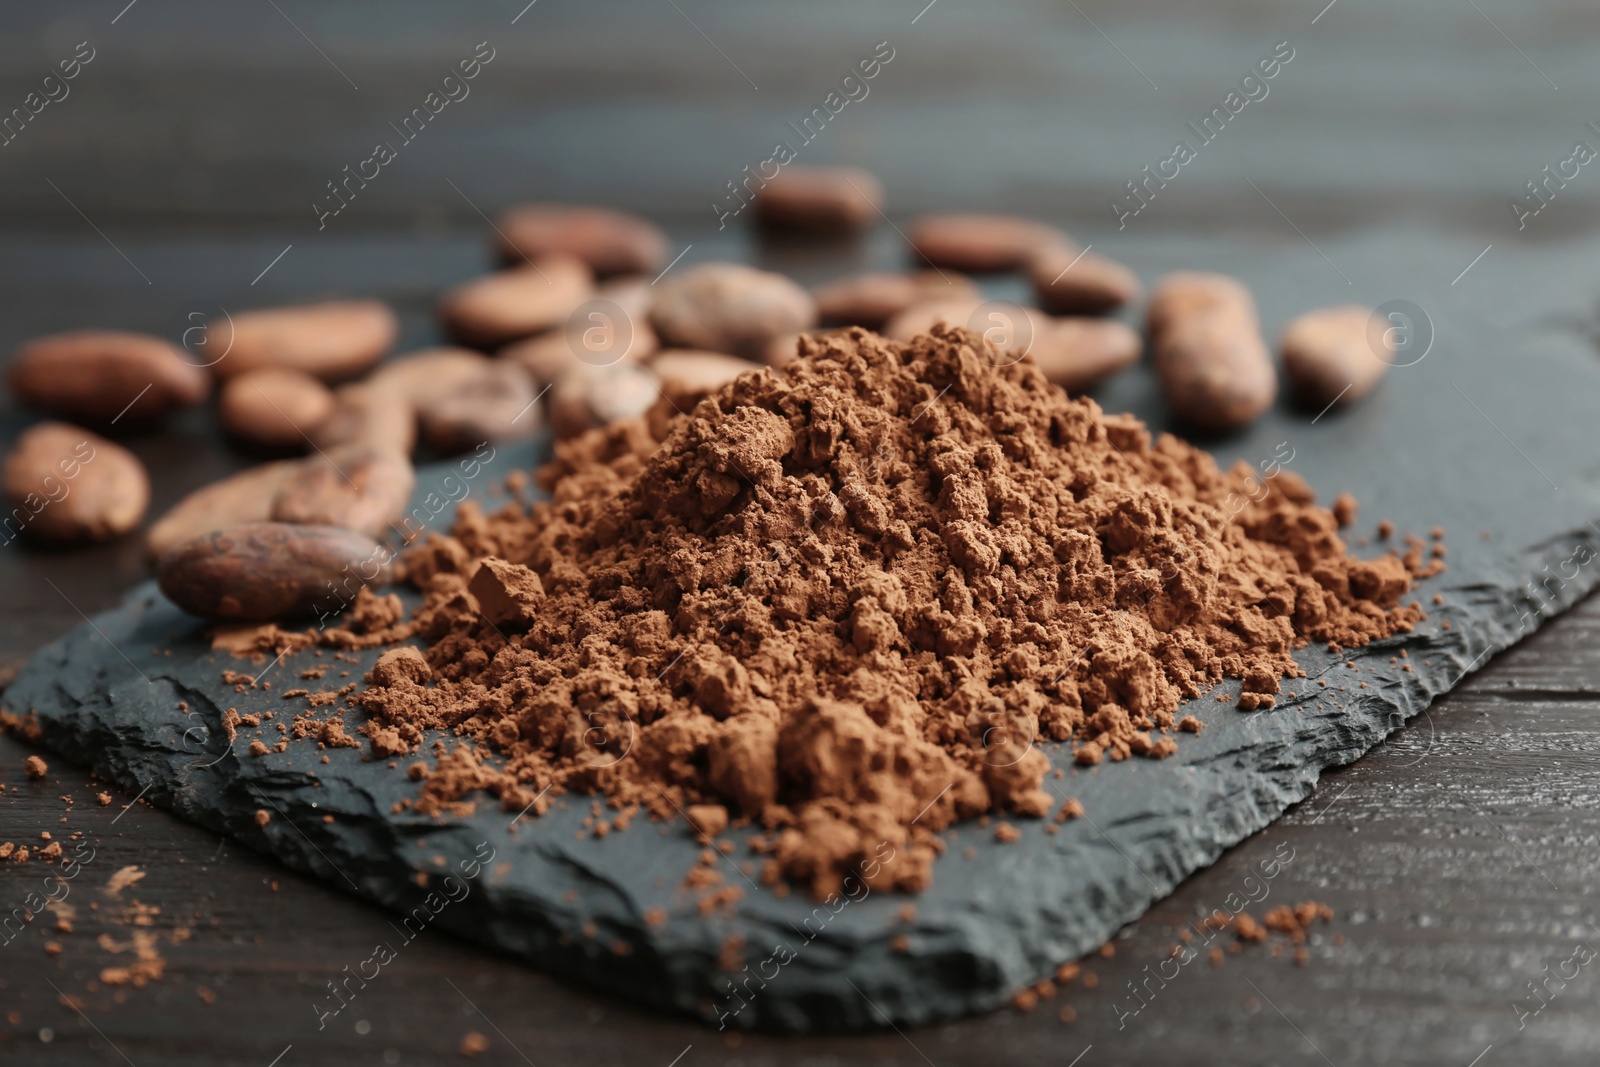 Photo of Slate plate with cocoa powder and beans on table